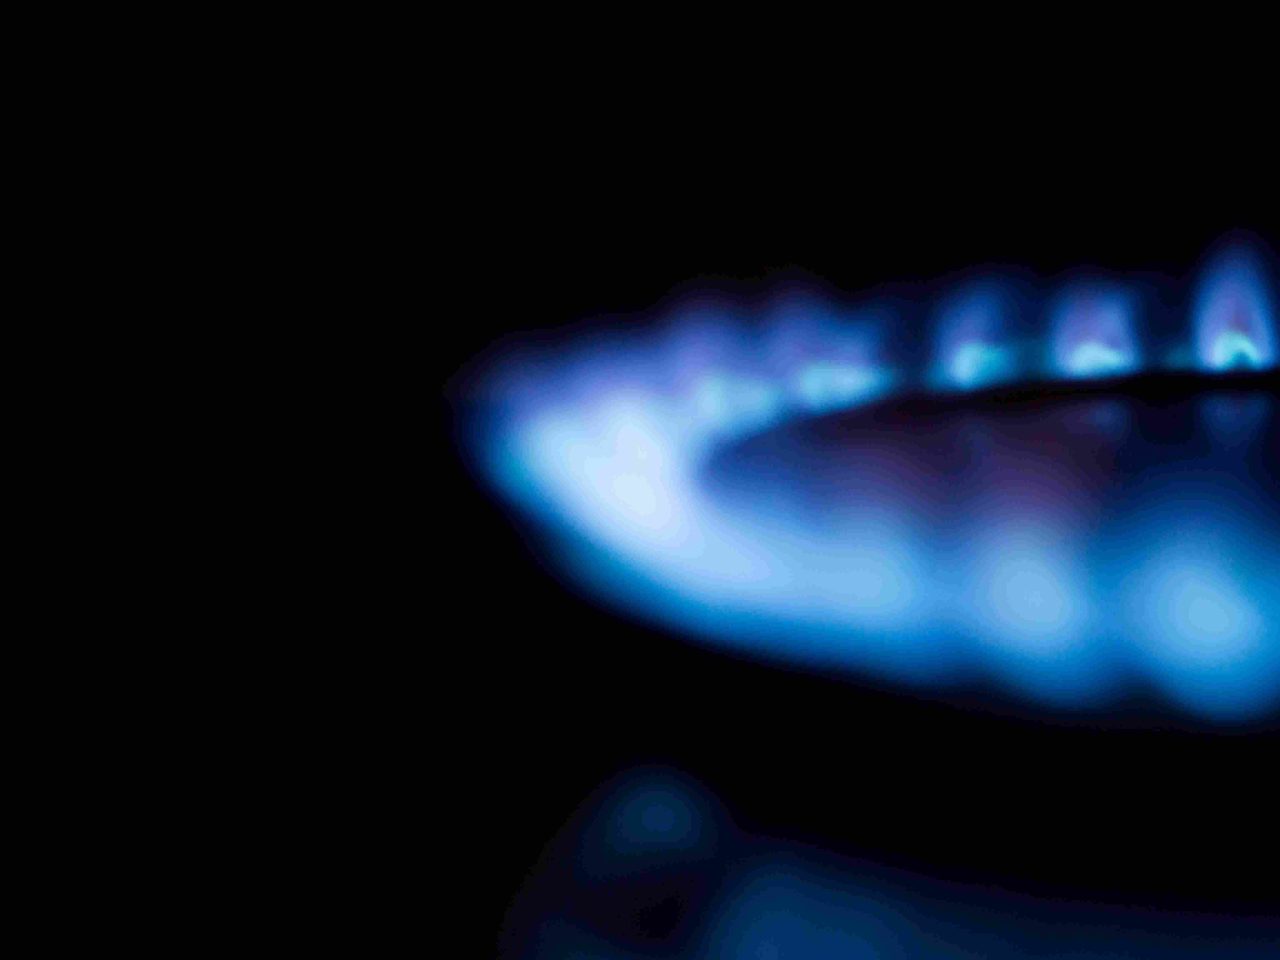 Black background with up close image of blue gas hob ring fire